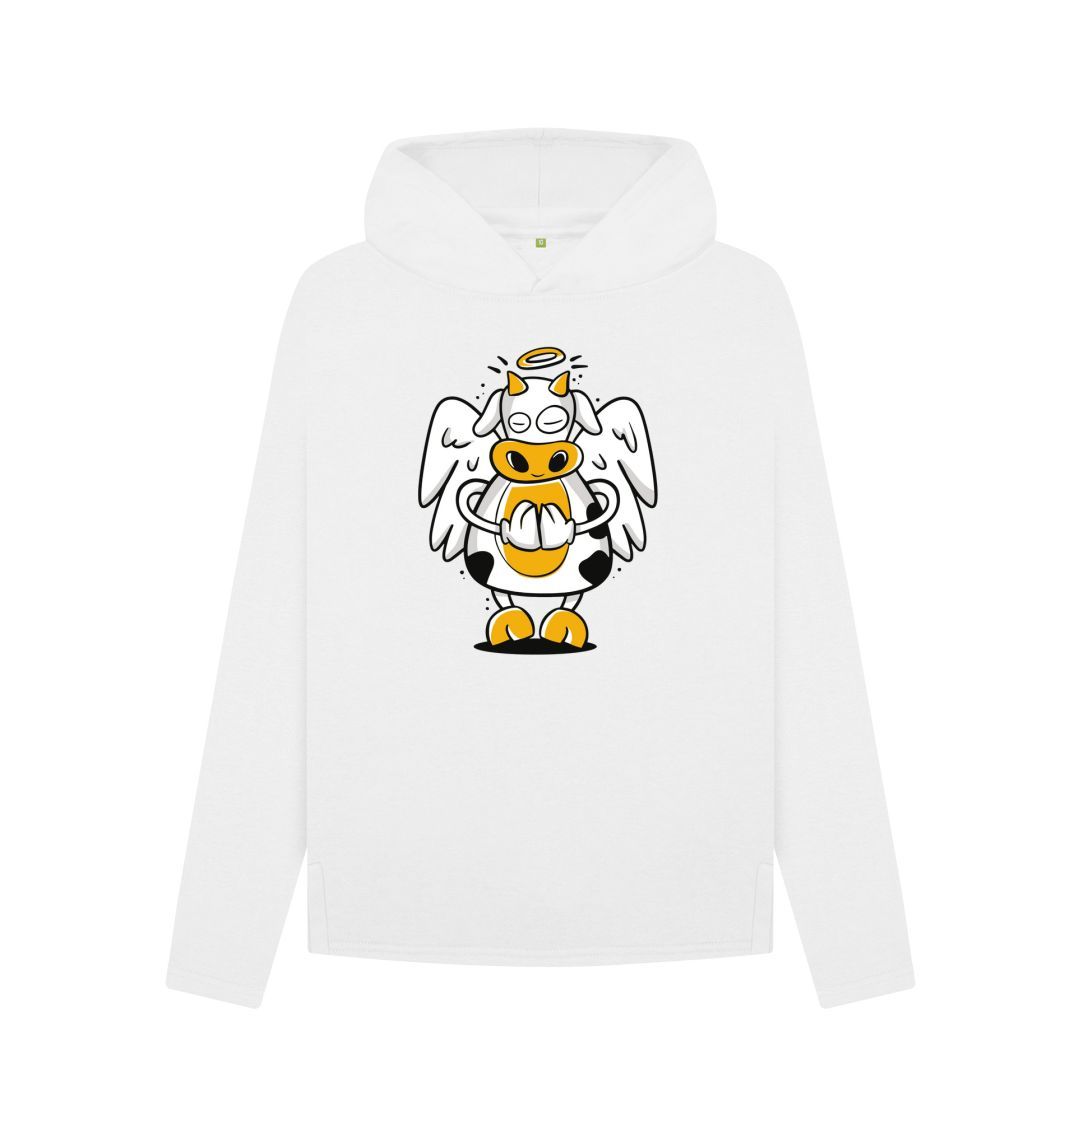 White Angelic Cow Women's Relaxed Fit Hoodie